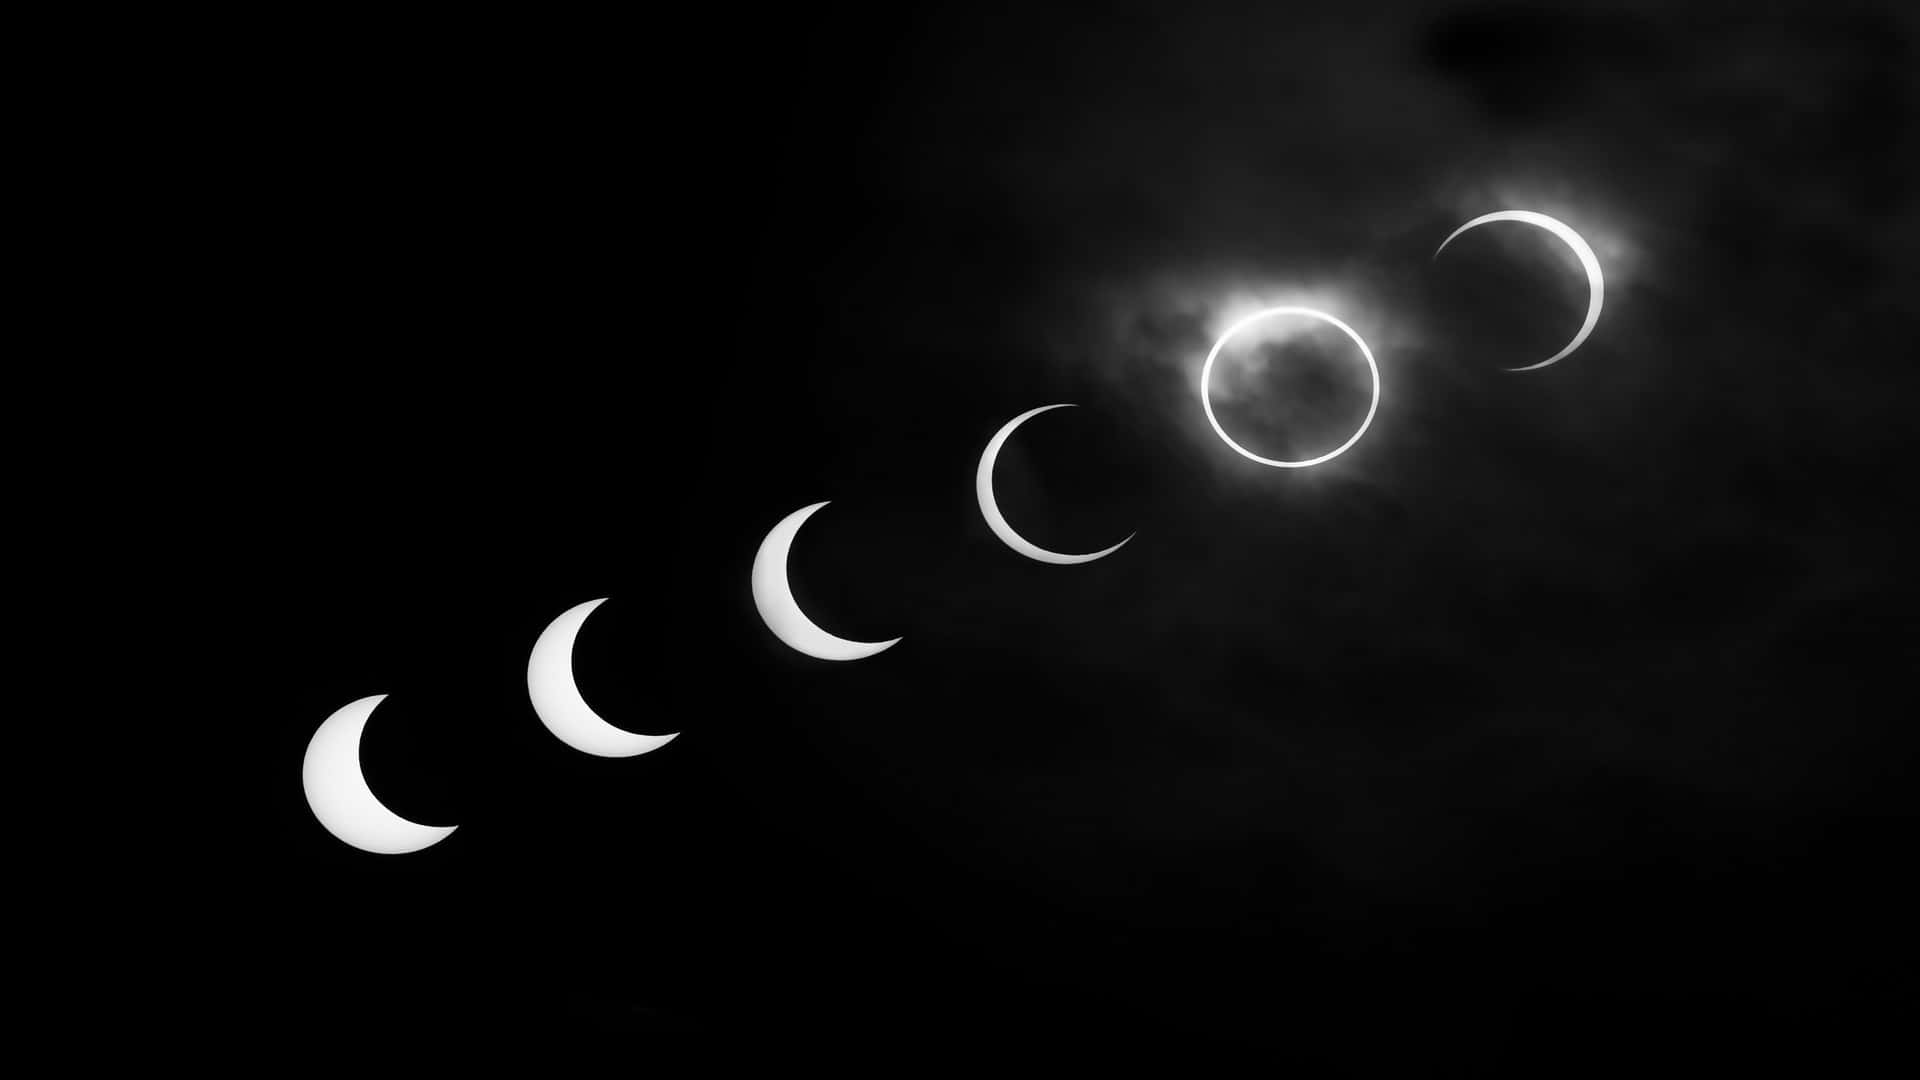 A Series Of Eclipses In The Sky